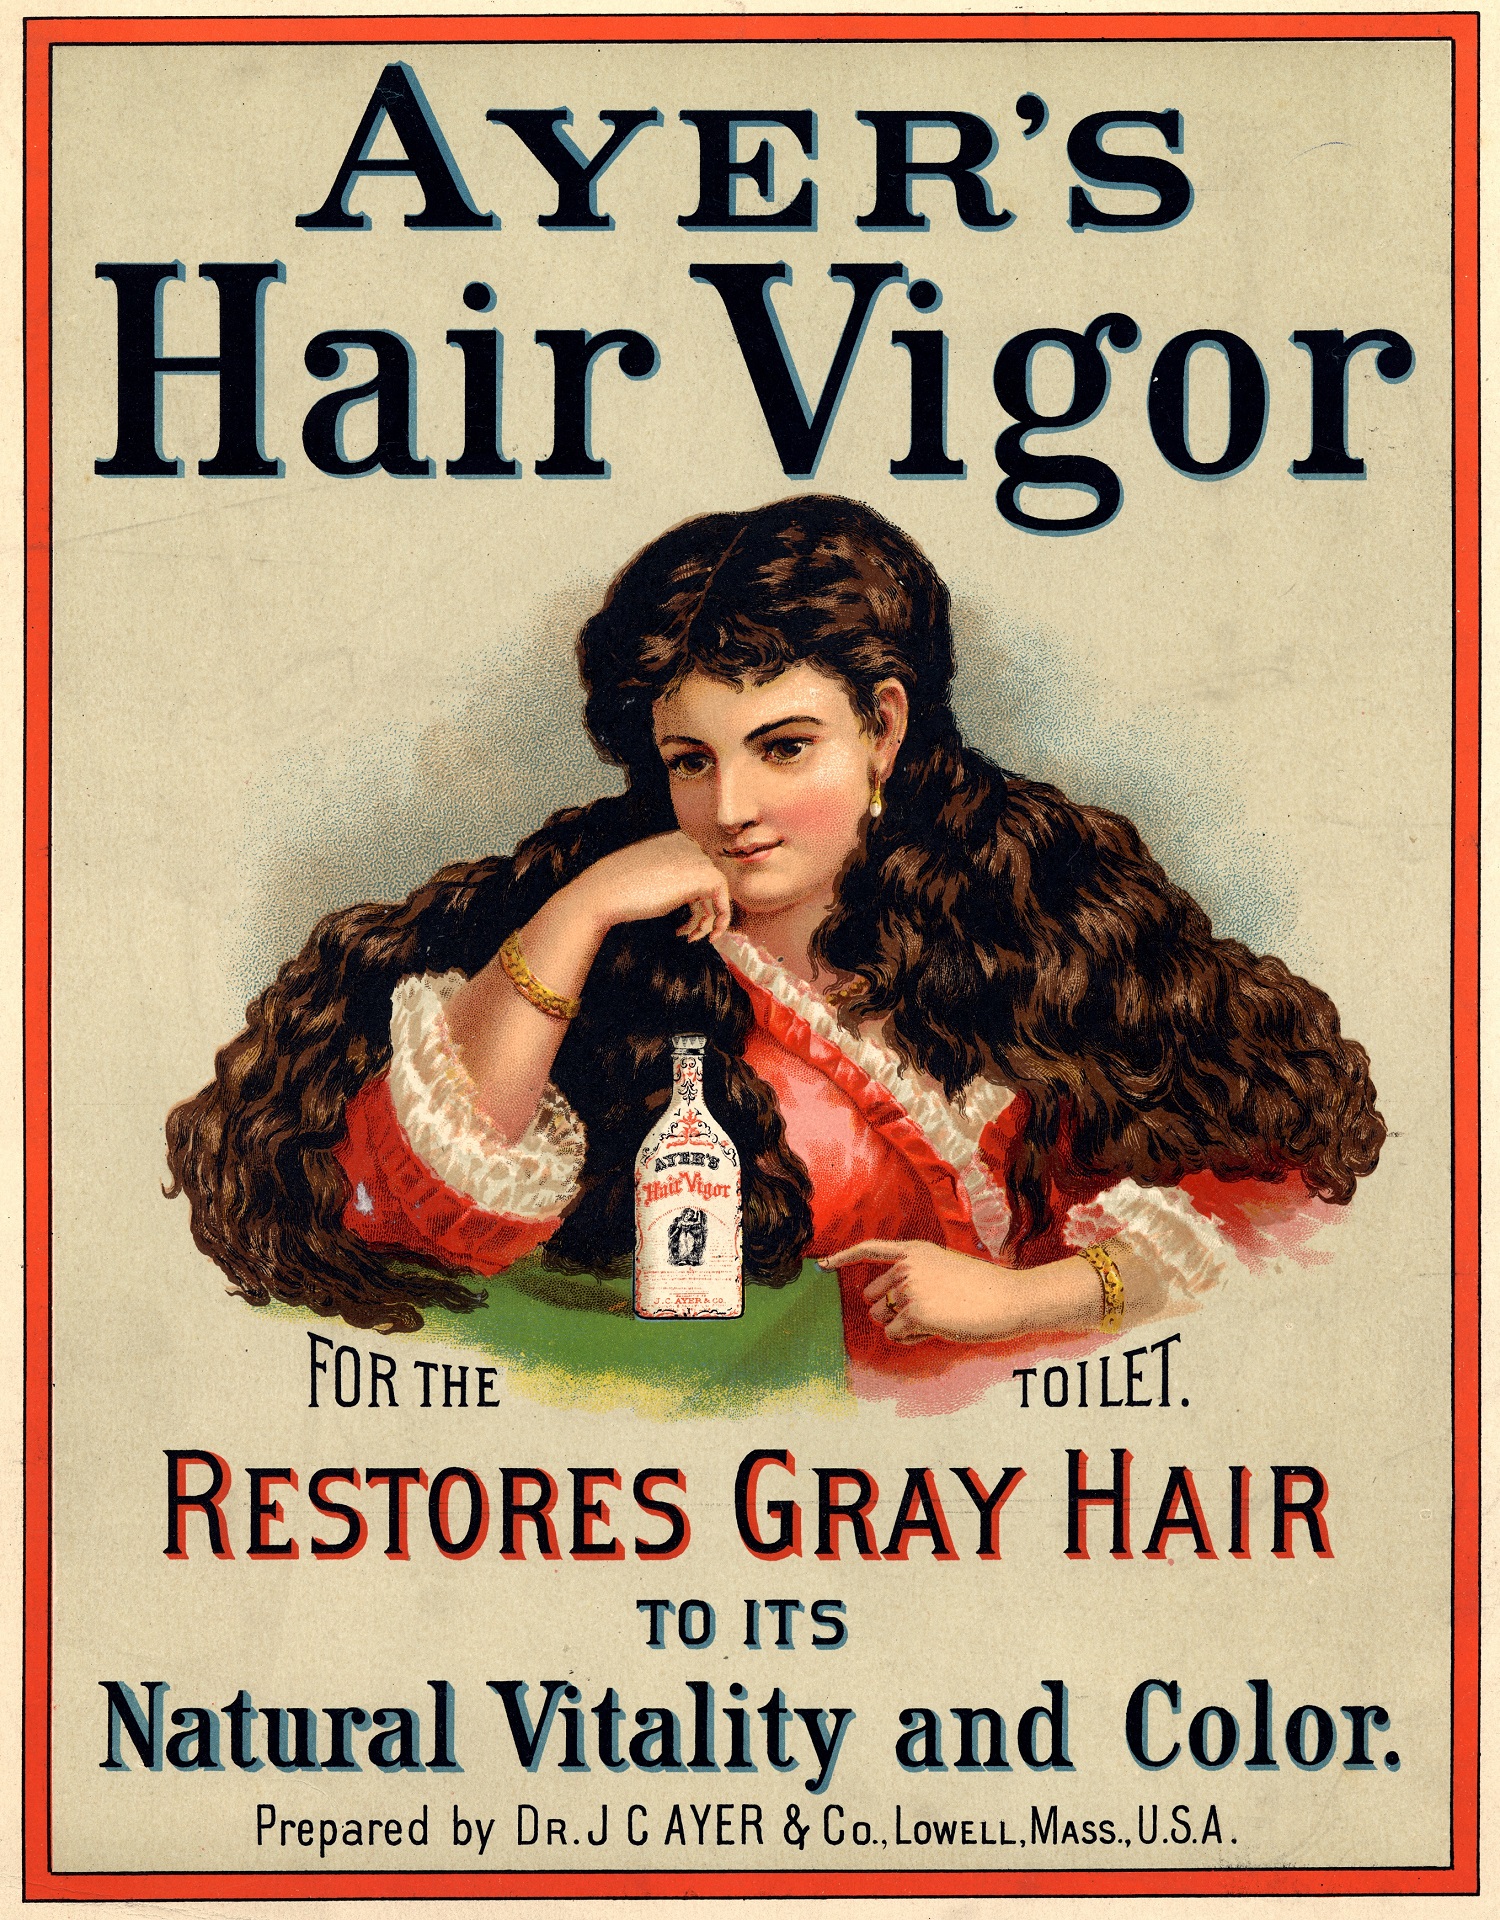 Hair Care | Smithsonian Institution